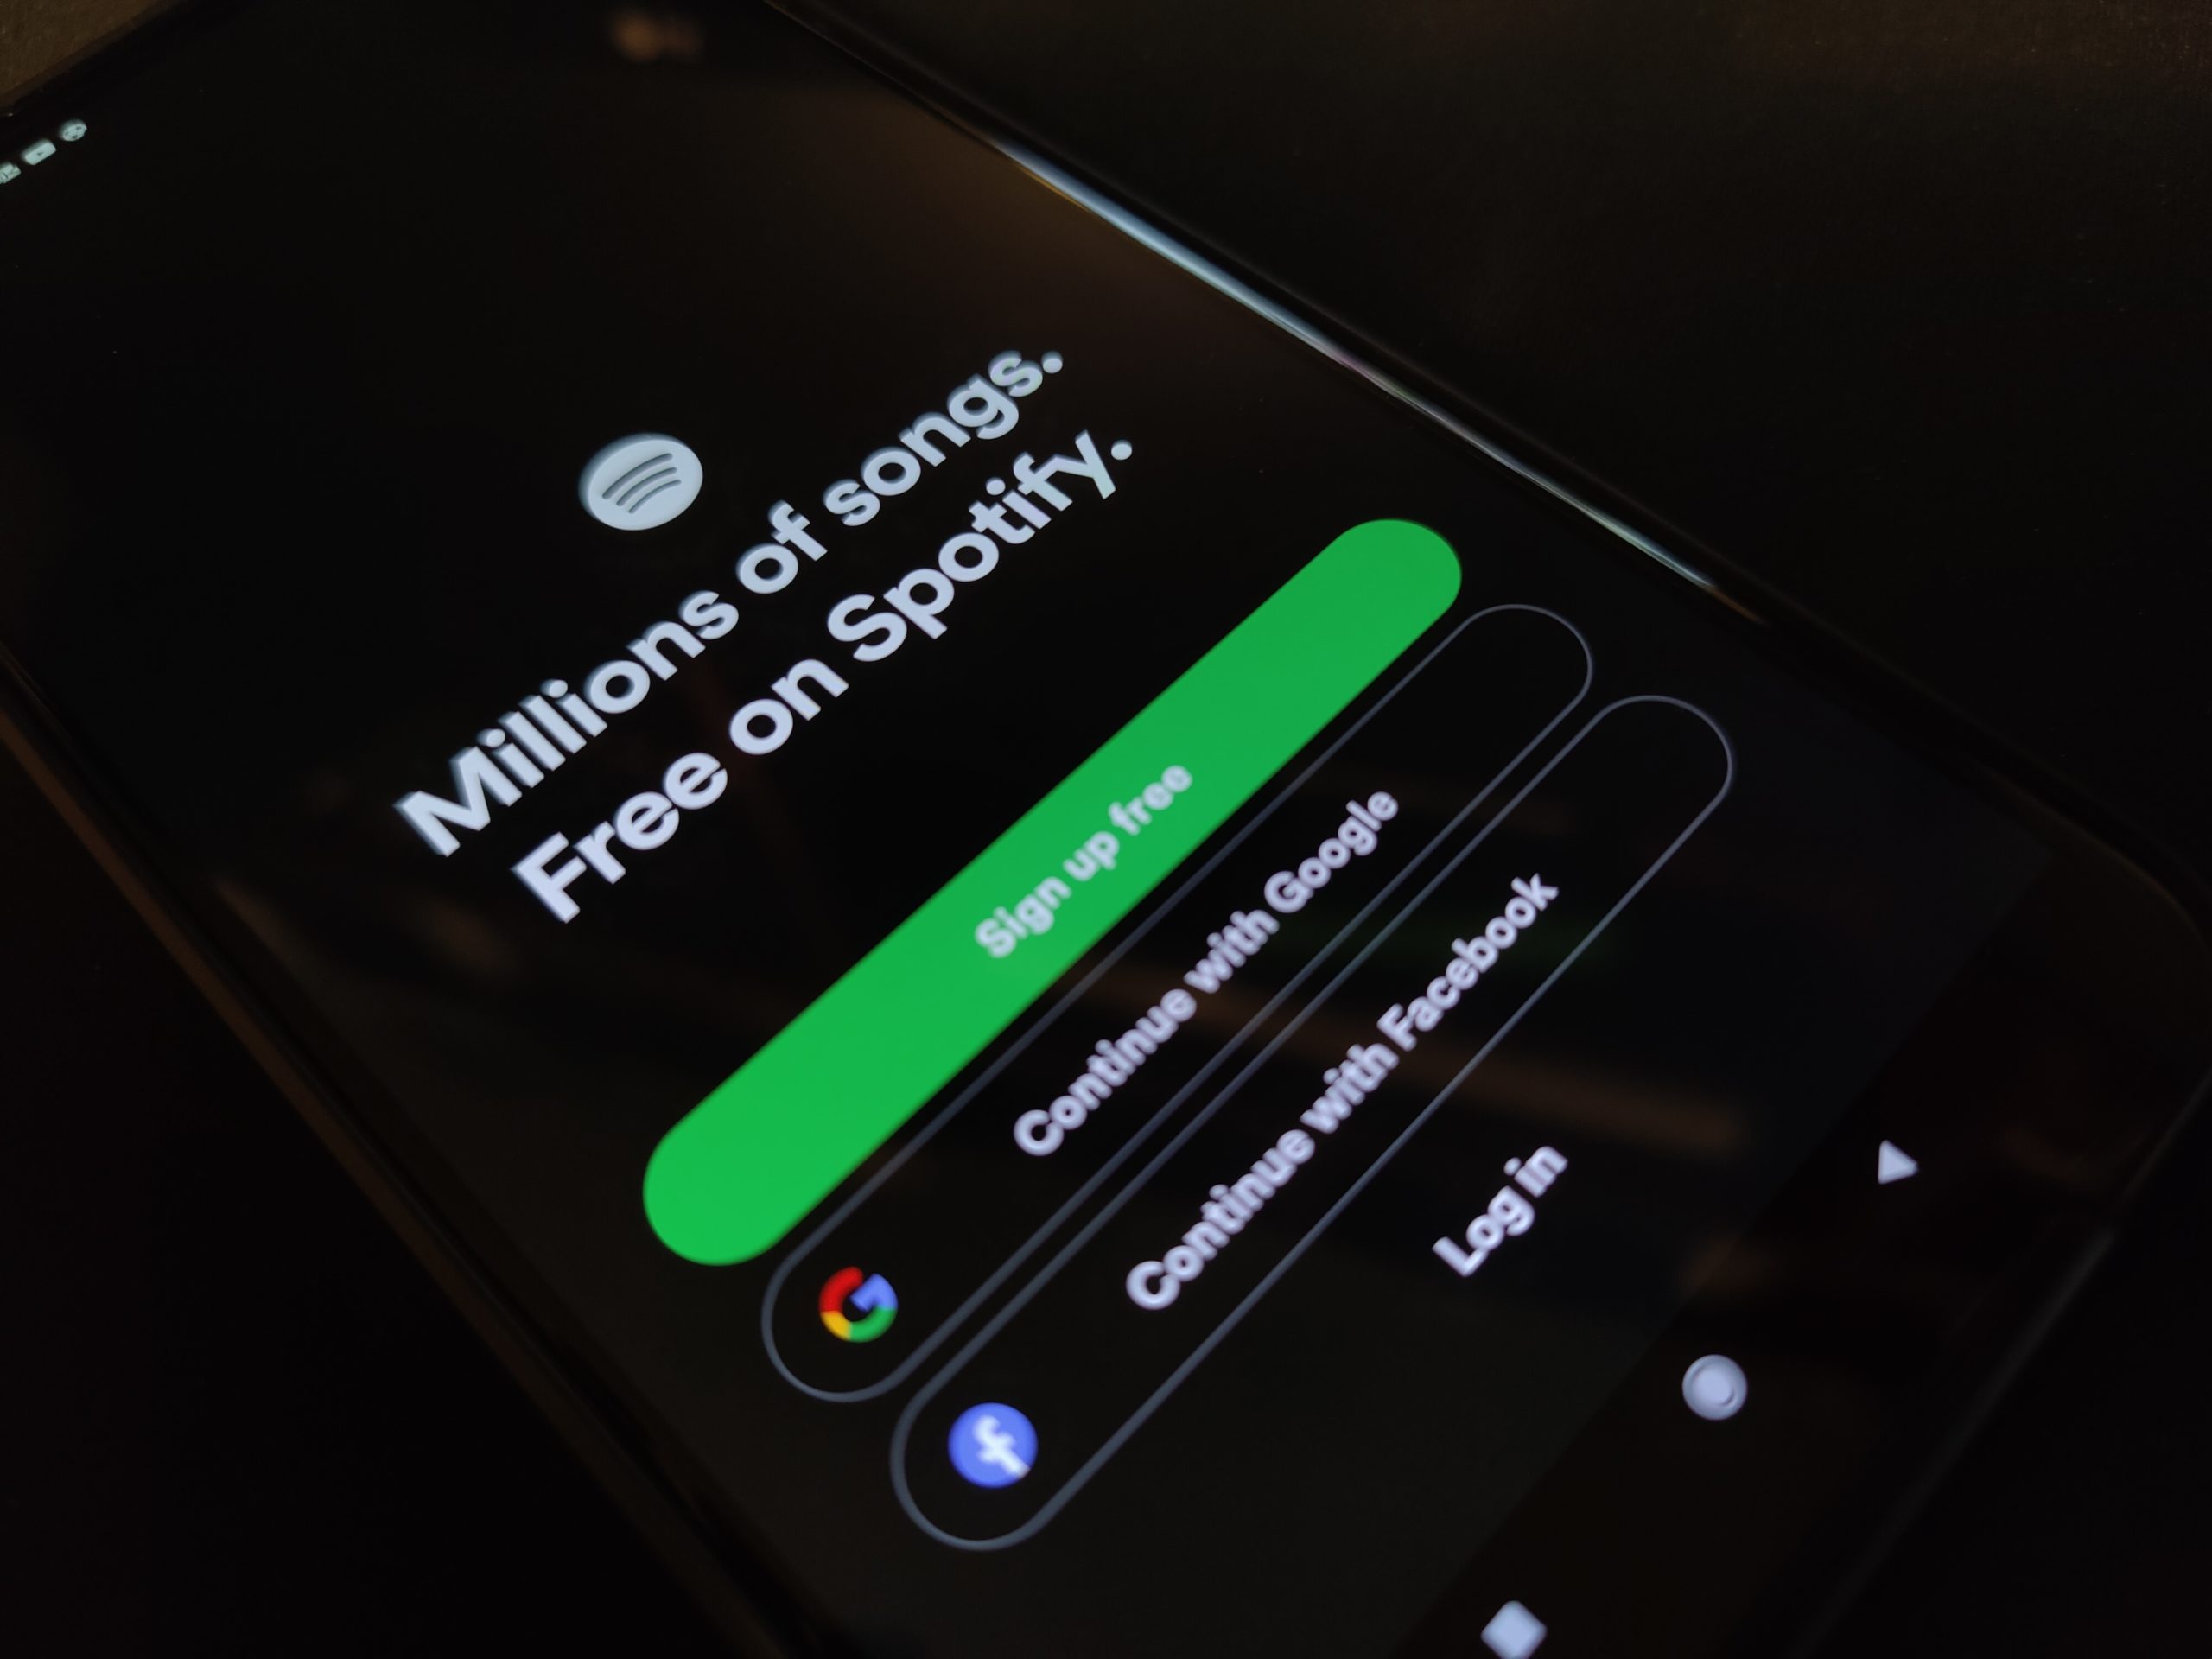 log out of spotify on all devices